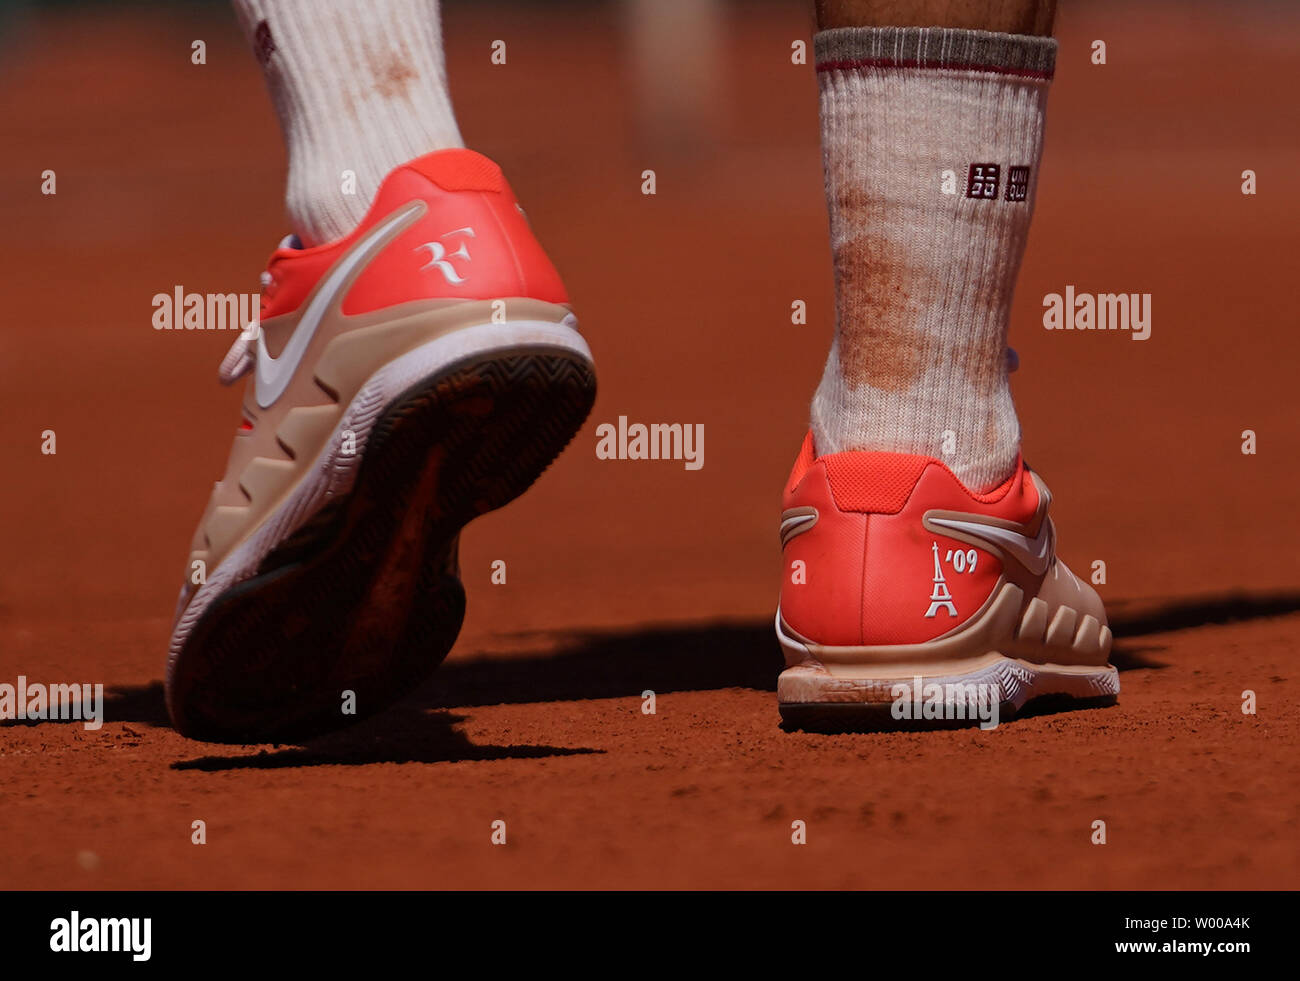 The shoes of Roger Federer of Switzerland are seen during his French Open  men's fourth round match against Leonardo Mayer of Argentina at Roland  Garros in Paris on June 2, 2019. Federer